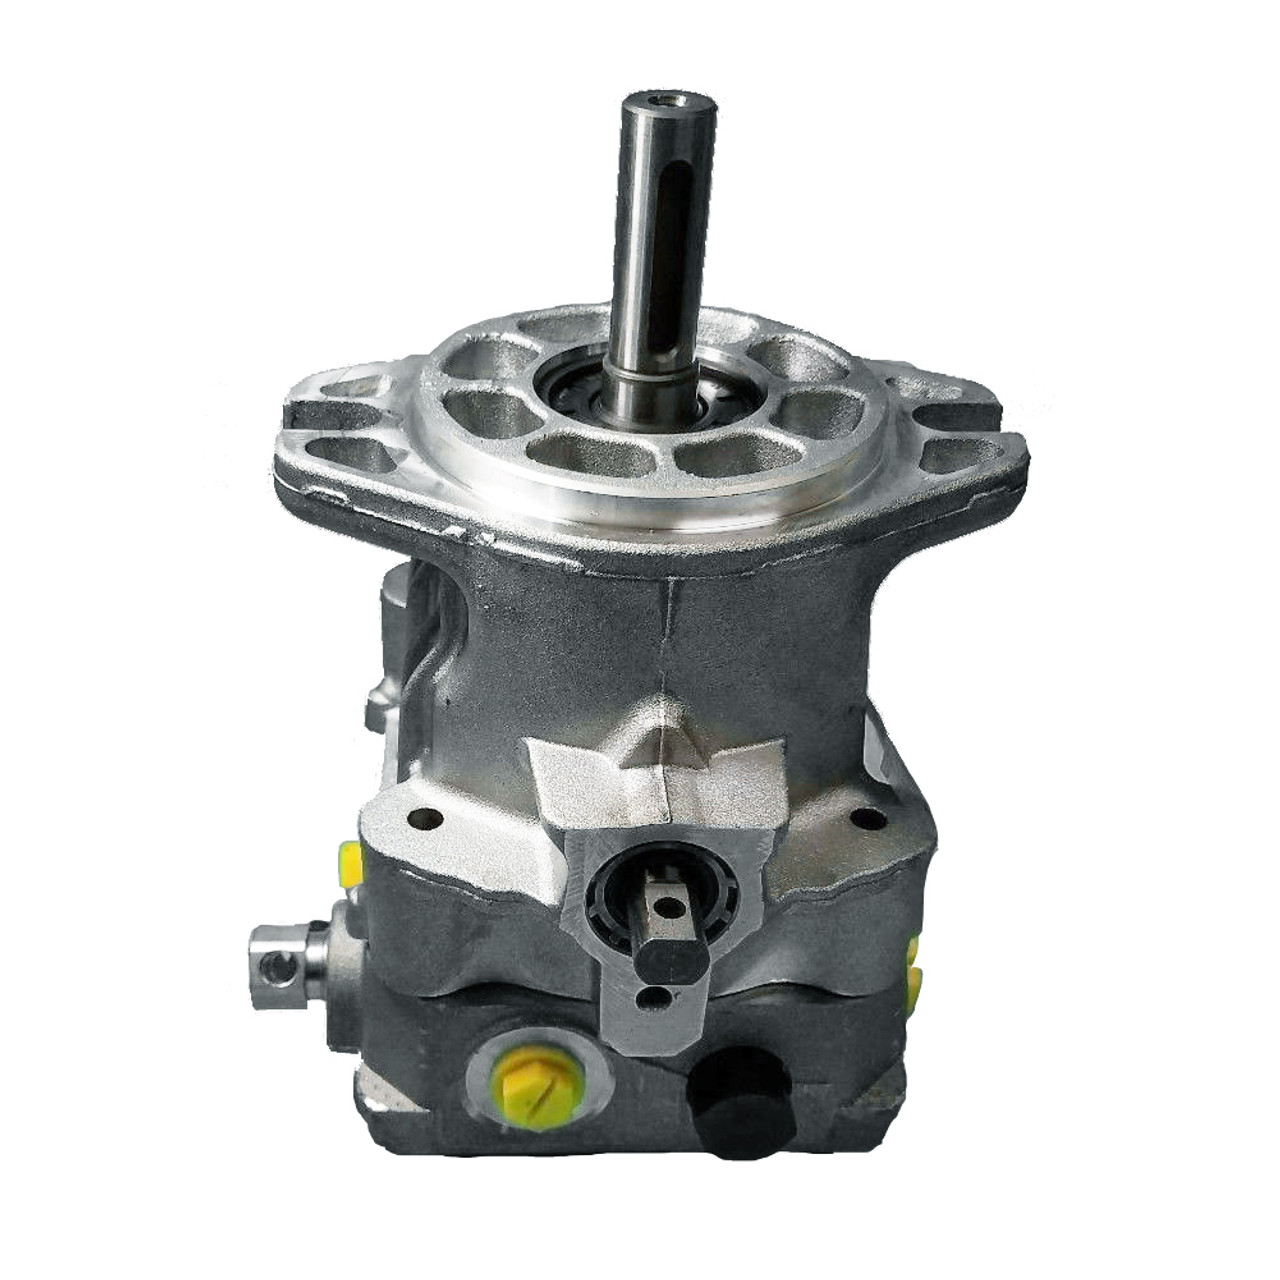 Hydro Gear Replacement Pump PG-1GCC-DY1X-XXXX / Husqvarna Lawn Mowers & Others 539108246, 482644, BDP-10A-419